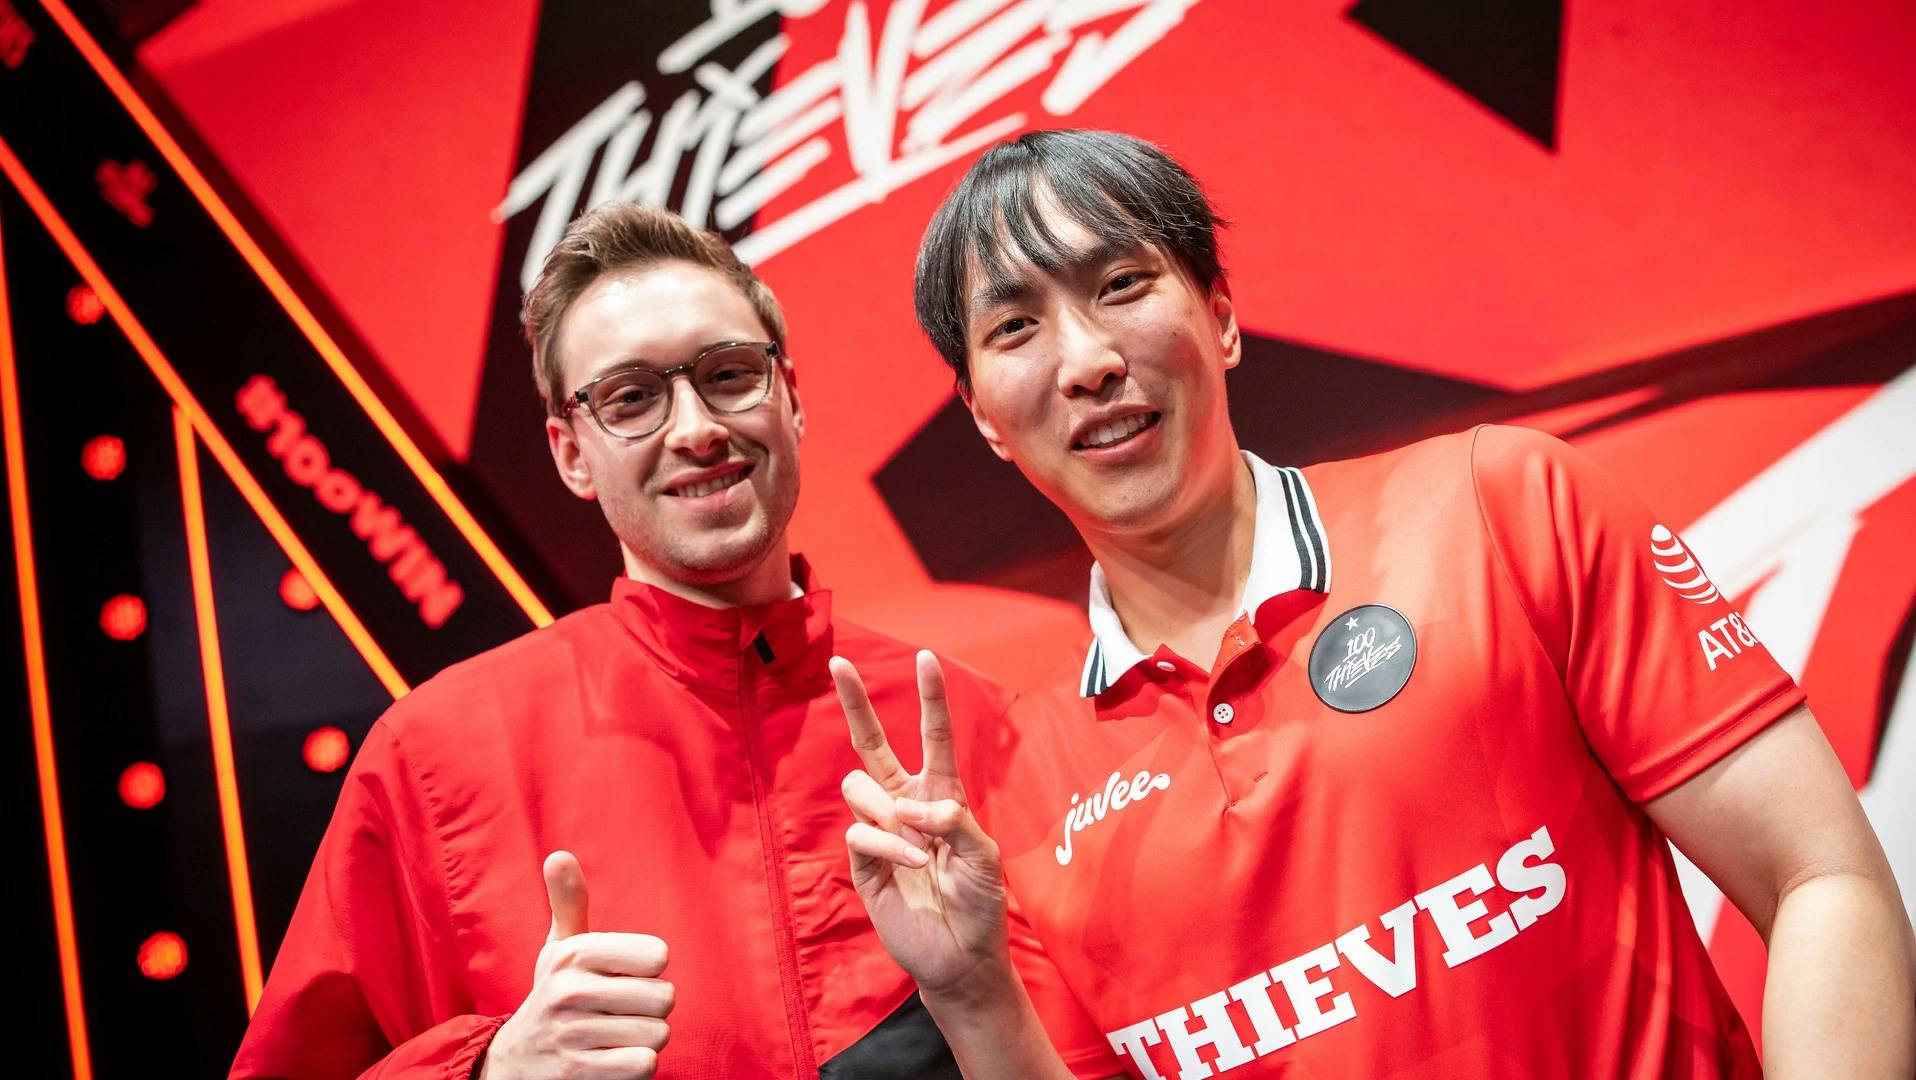 Doublelift finds his groove: LCS Week 1, Day 2 recap